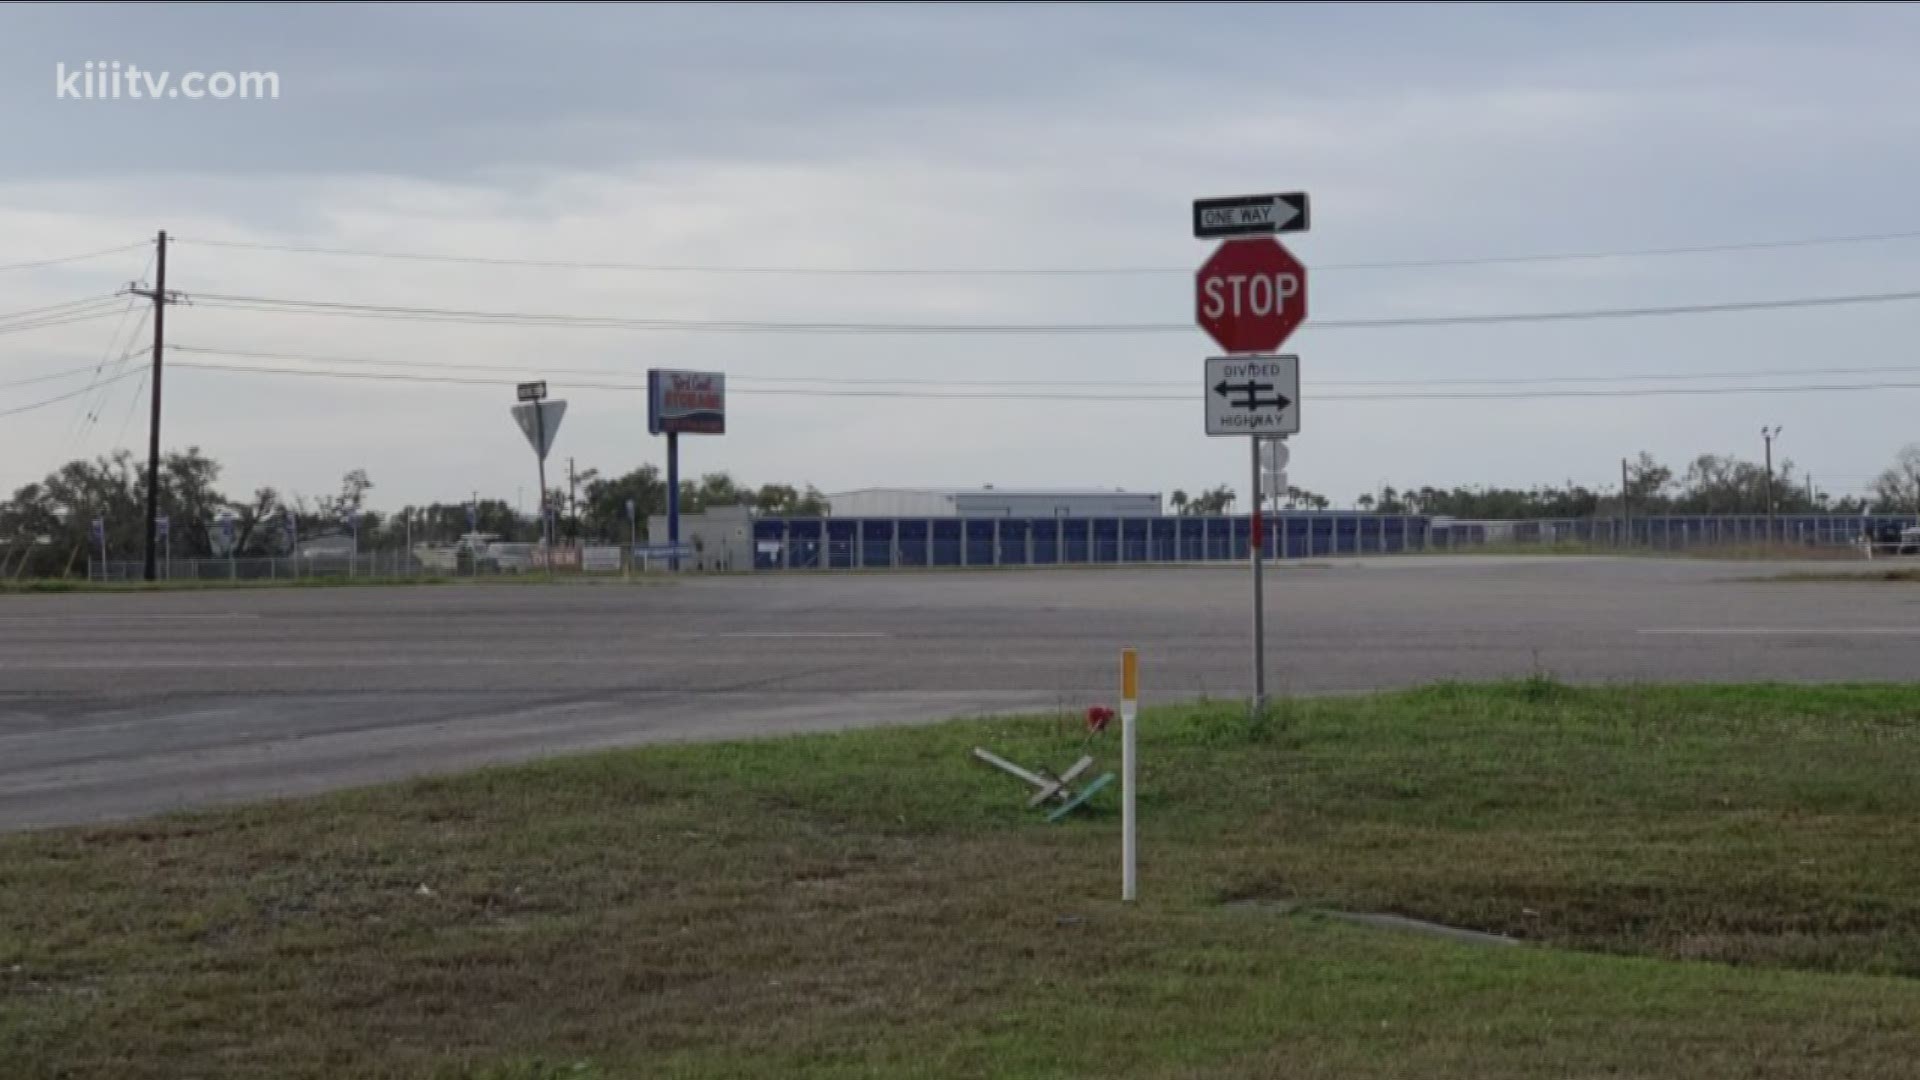 Two people were killed Wednesday evening in a crash involving an 18-wheeler at the intersection of Marshall Lane and Highway 35, according to the Aransas Pass Police Department.